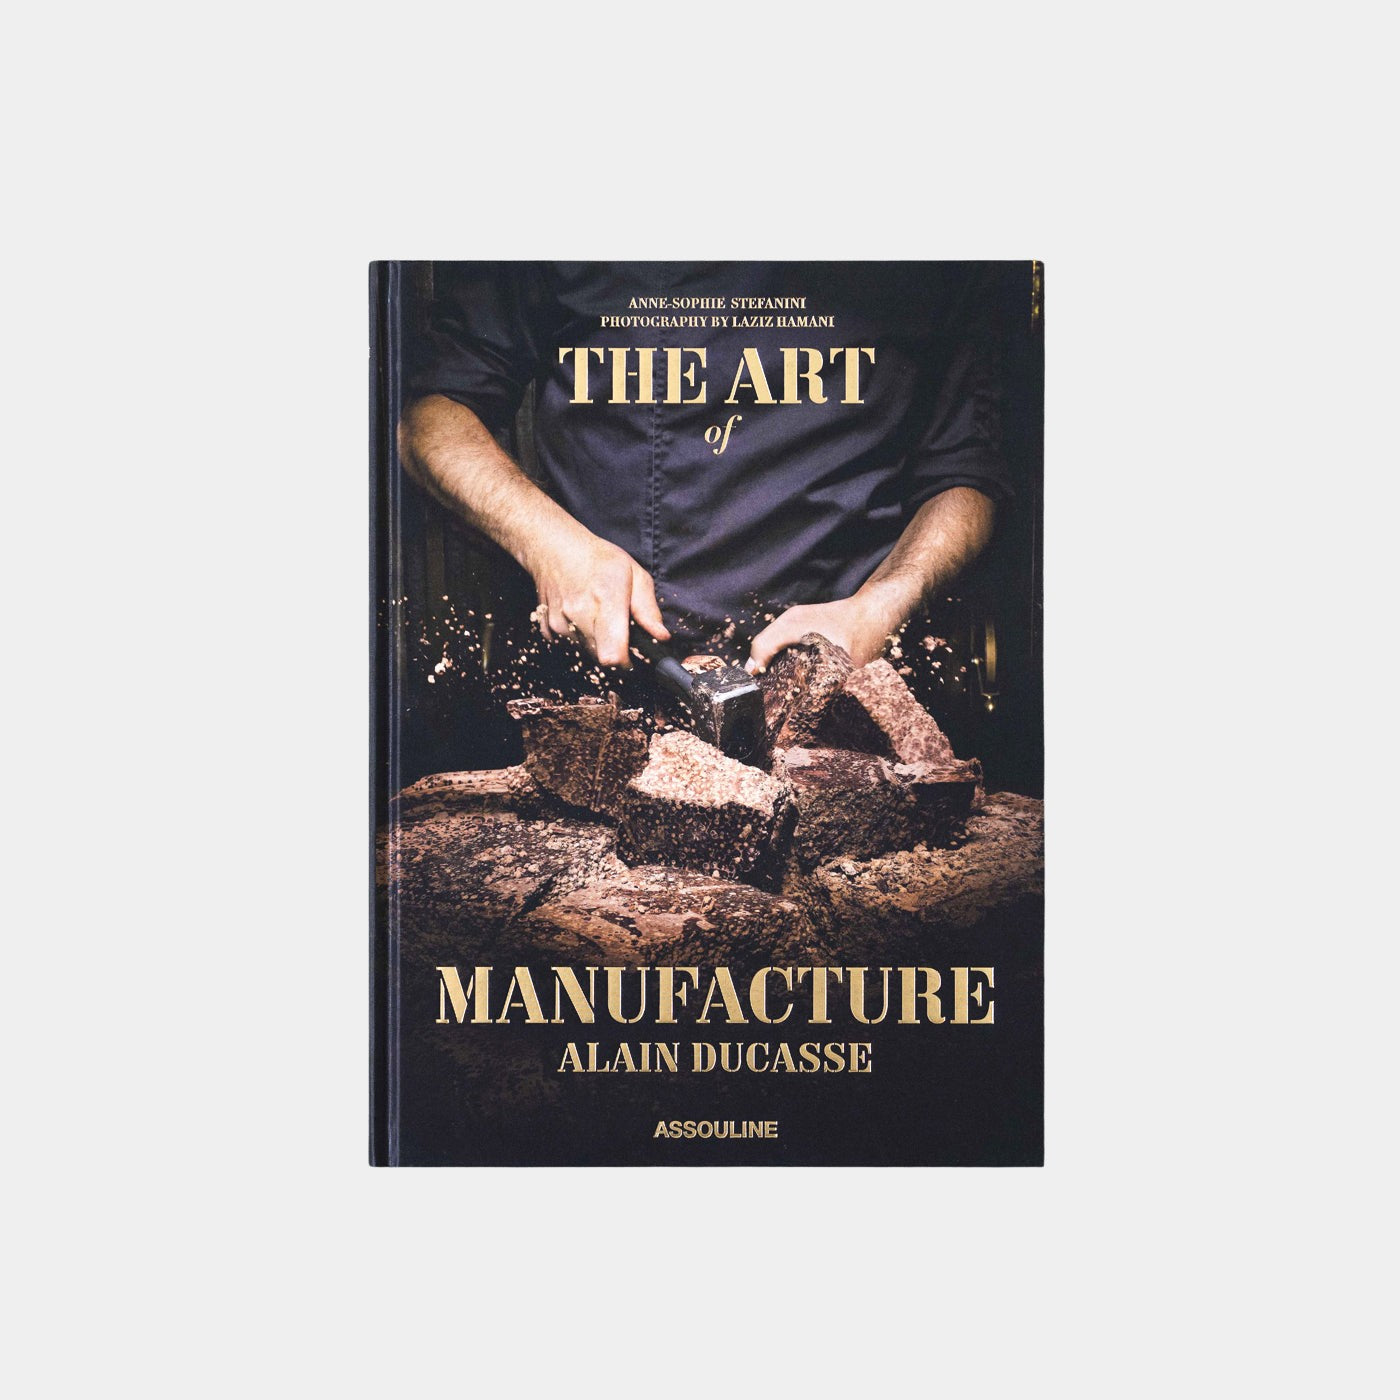 The Art of Manufacture: Alain Ducasse